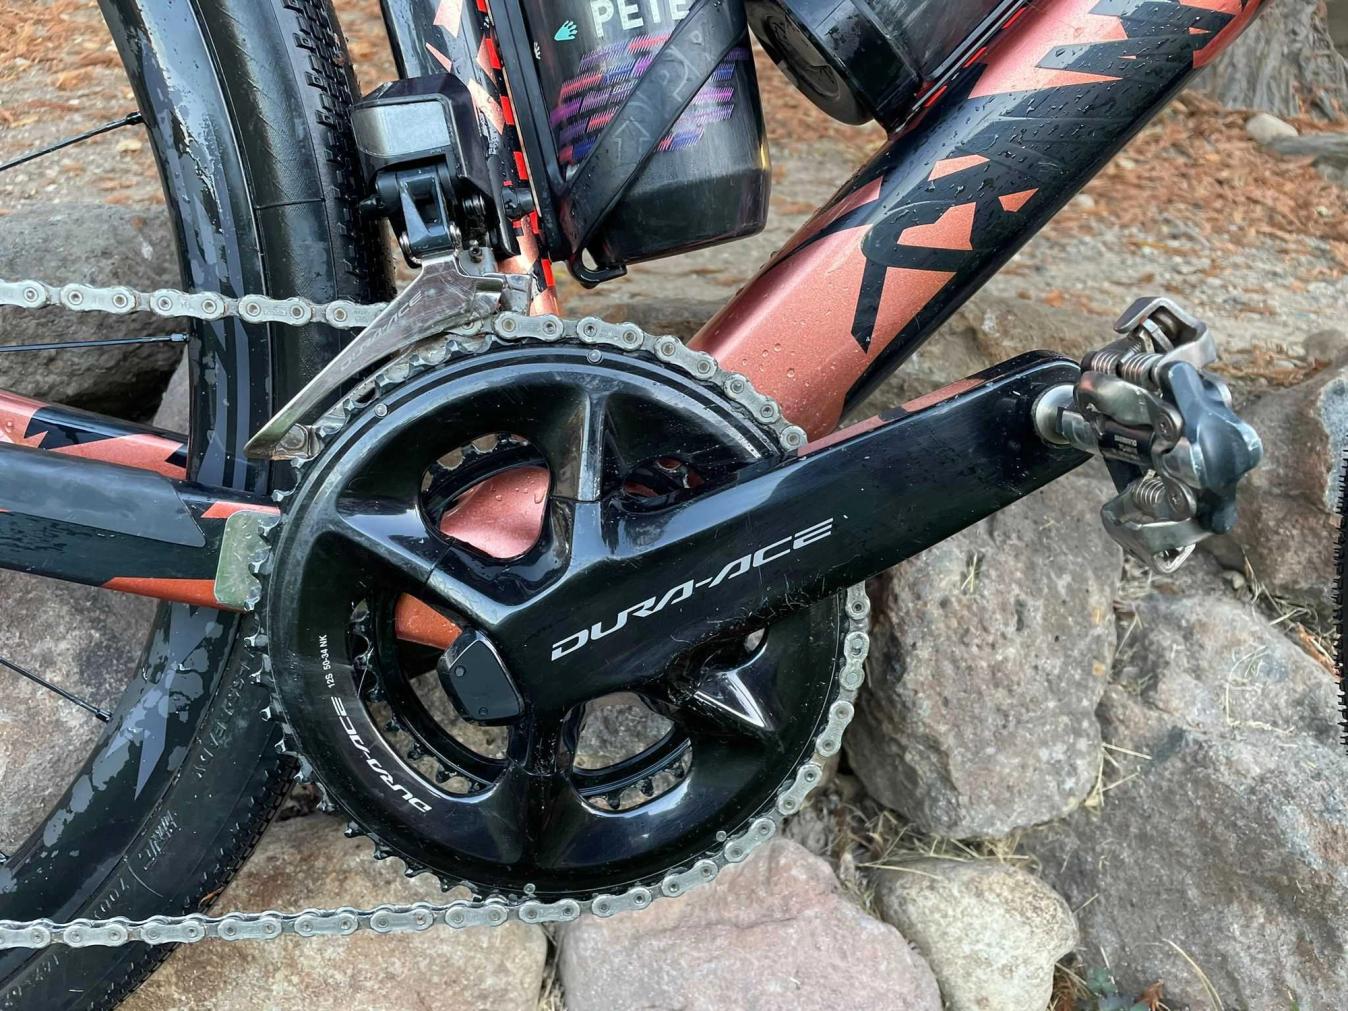 Stetina has a 2x set-up with a mix of Shimano Dura-Ace and GRX components